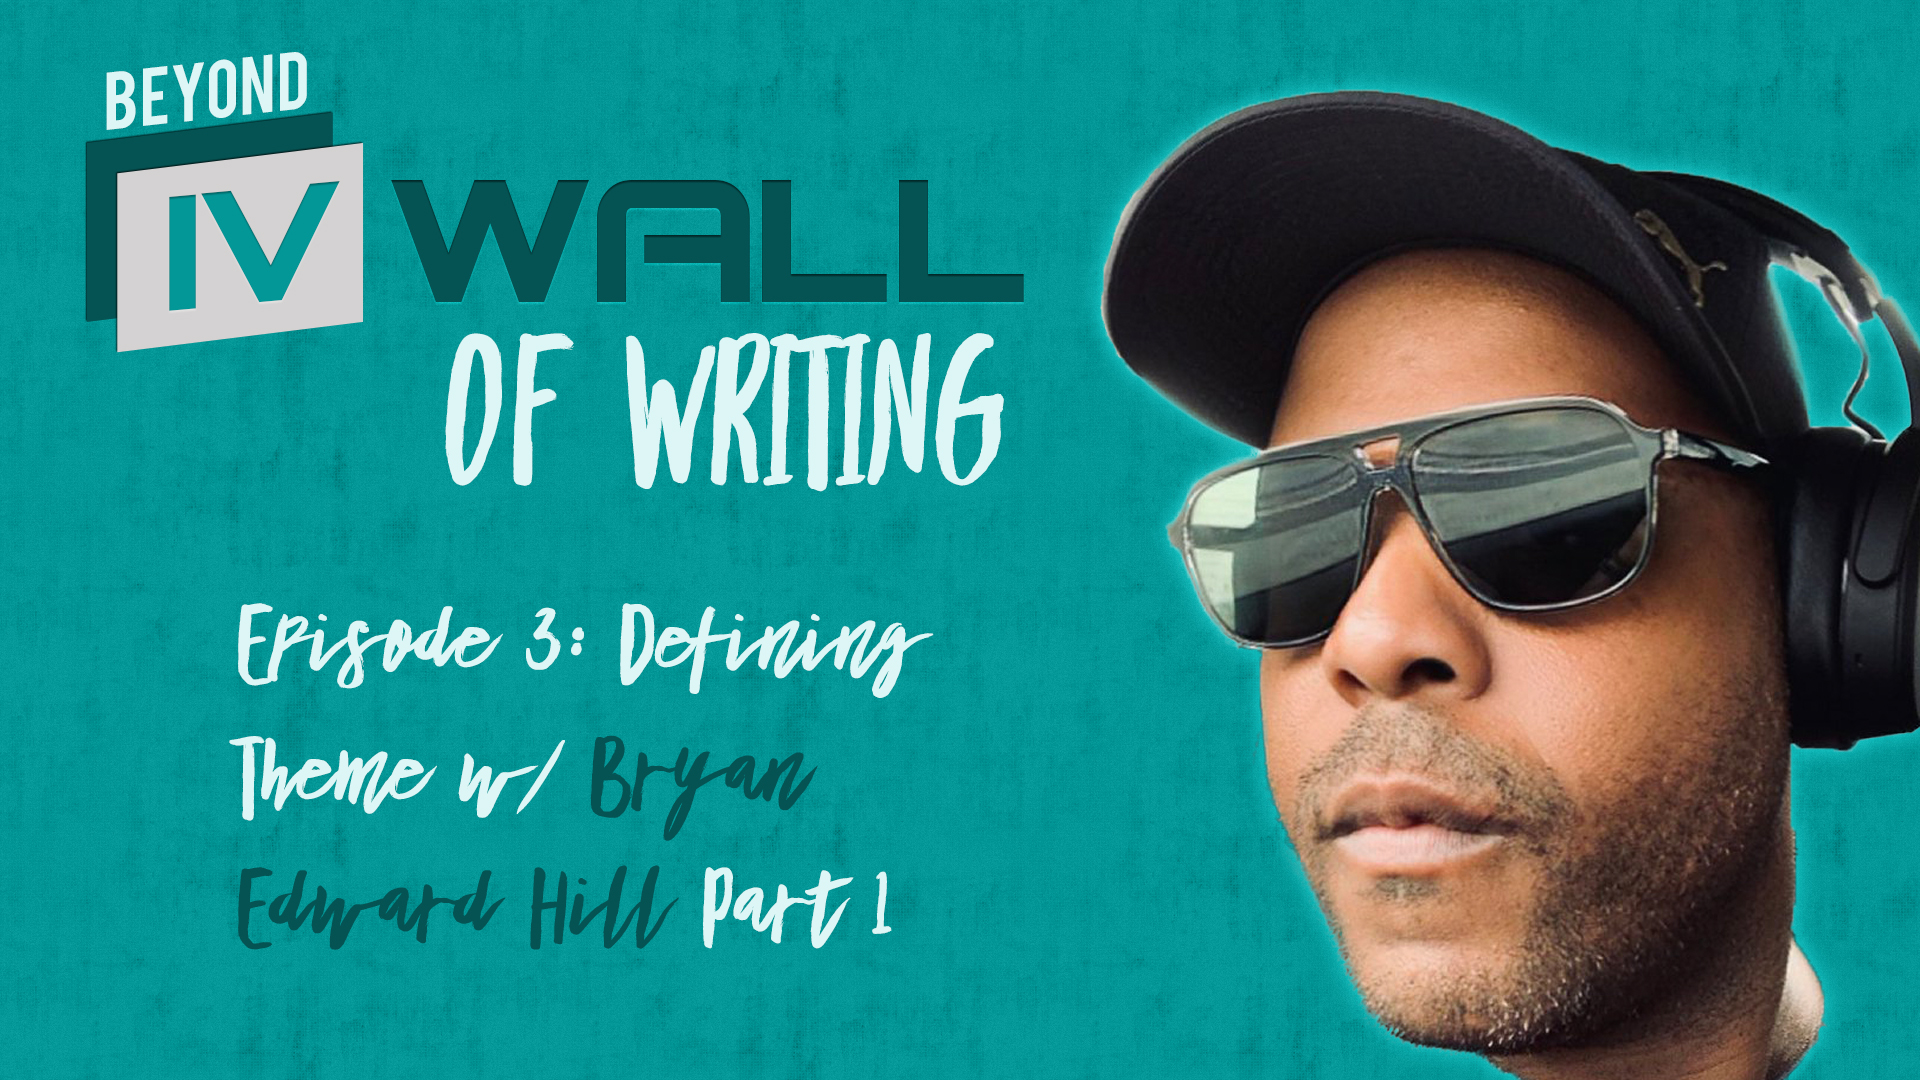 Beyond the IVWall of Writing: Episode 3- Defining Theme w/ Bryan Edward Hill, Part 1